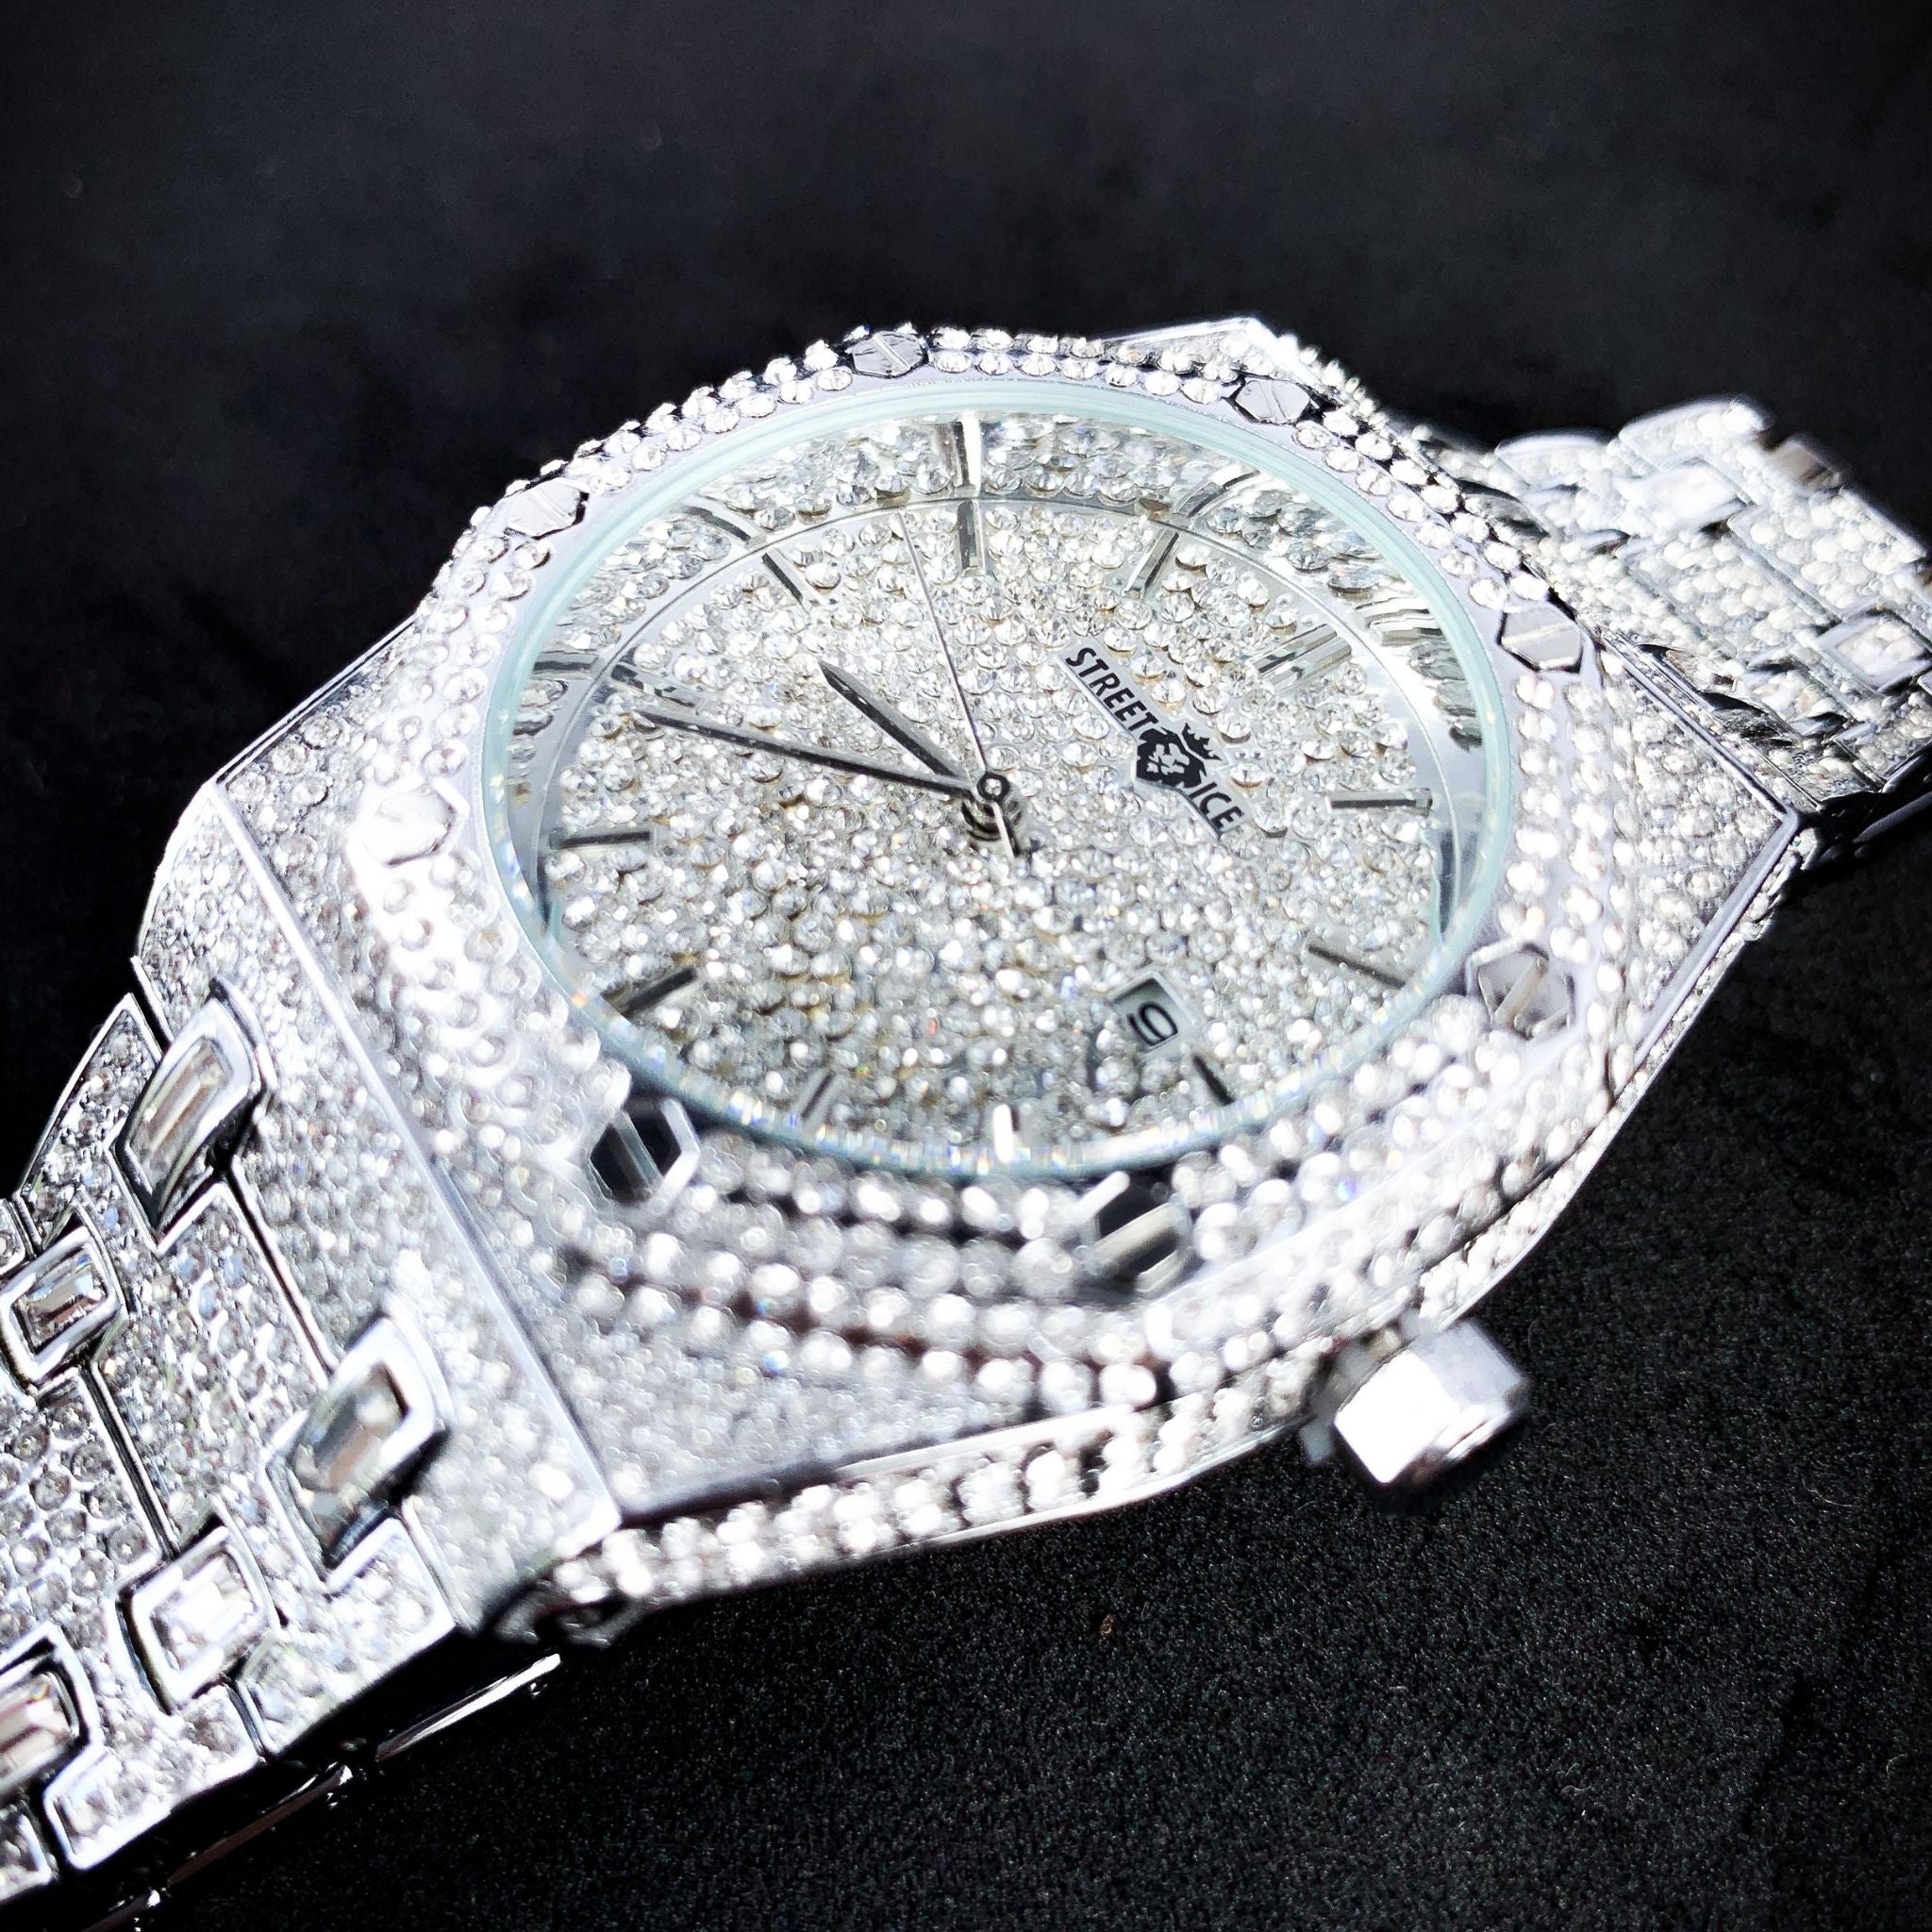 NEW Iced Classic Watch - Streetice